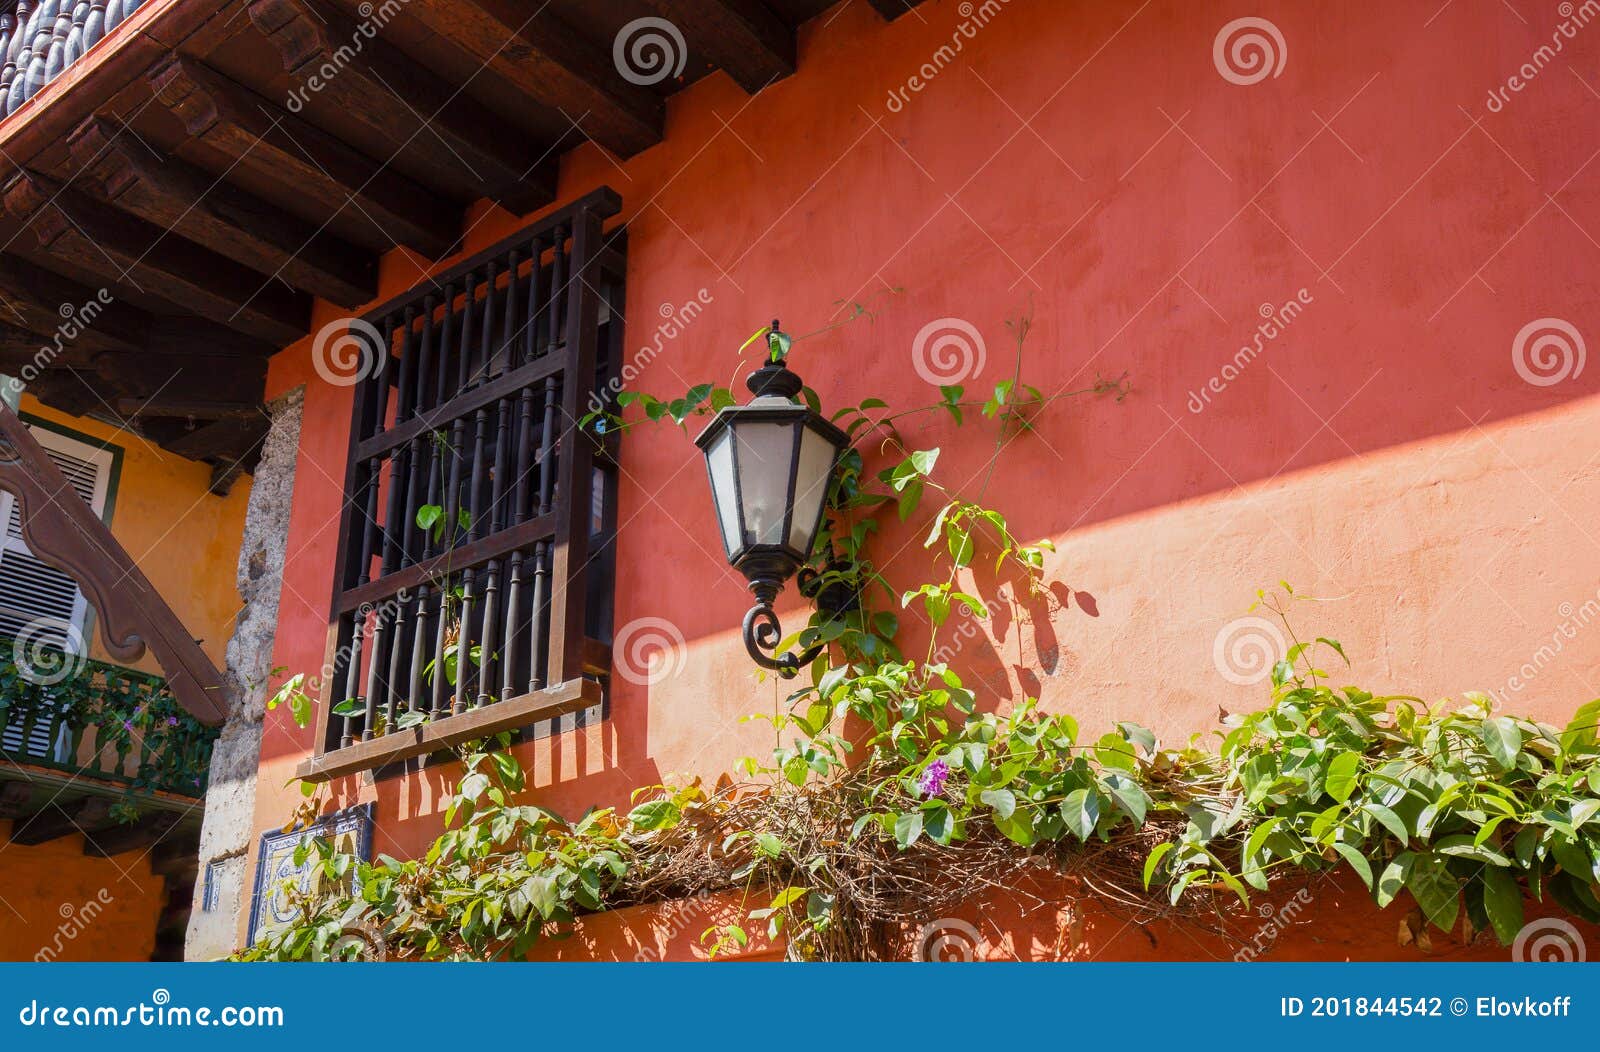 famous colonial cartagena walled city cuidad amurrallada and its colorful buildings in historic city center, a ated unesco